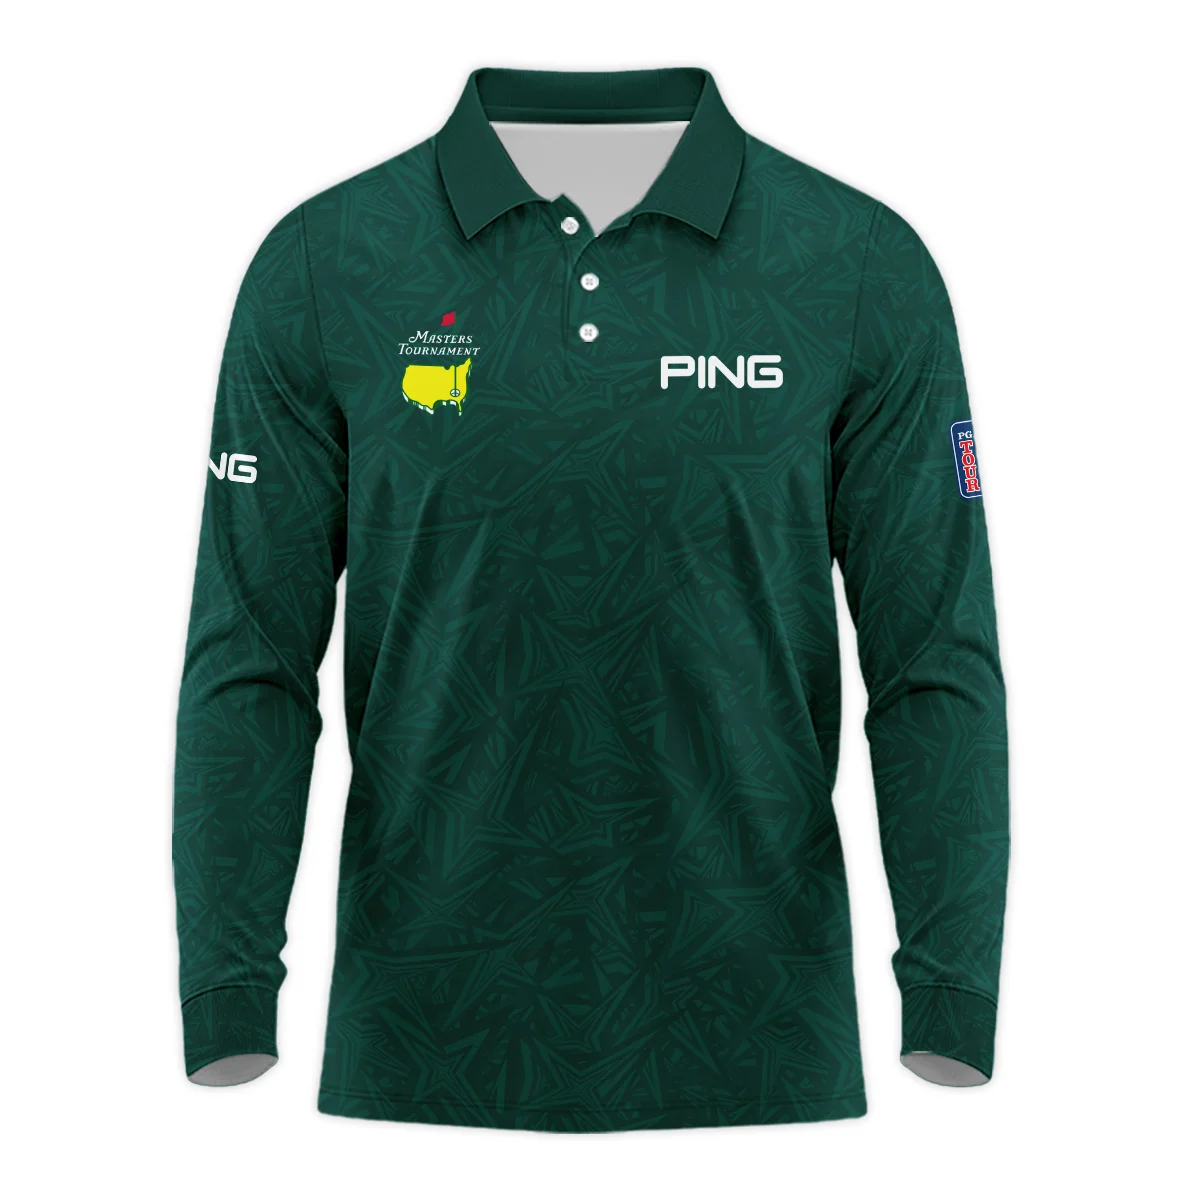 Stars Dark Green Abstract Sport Masters Tournament Ping Vneck Polo Shirt Style Classic Polo Shirt For Men